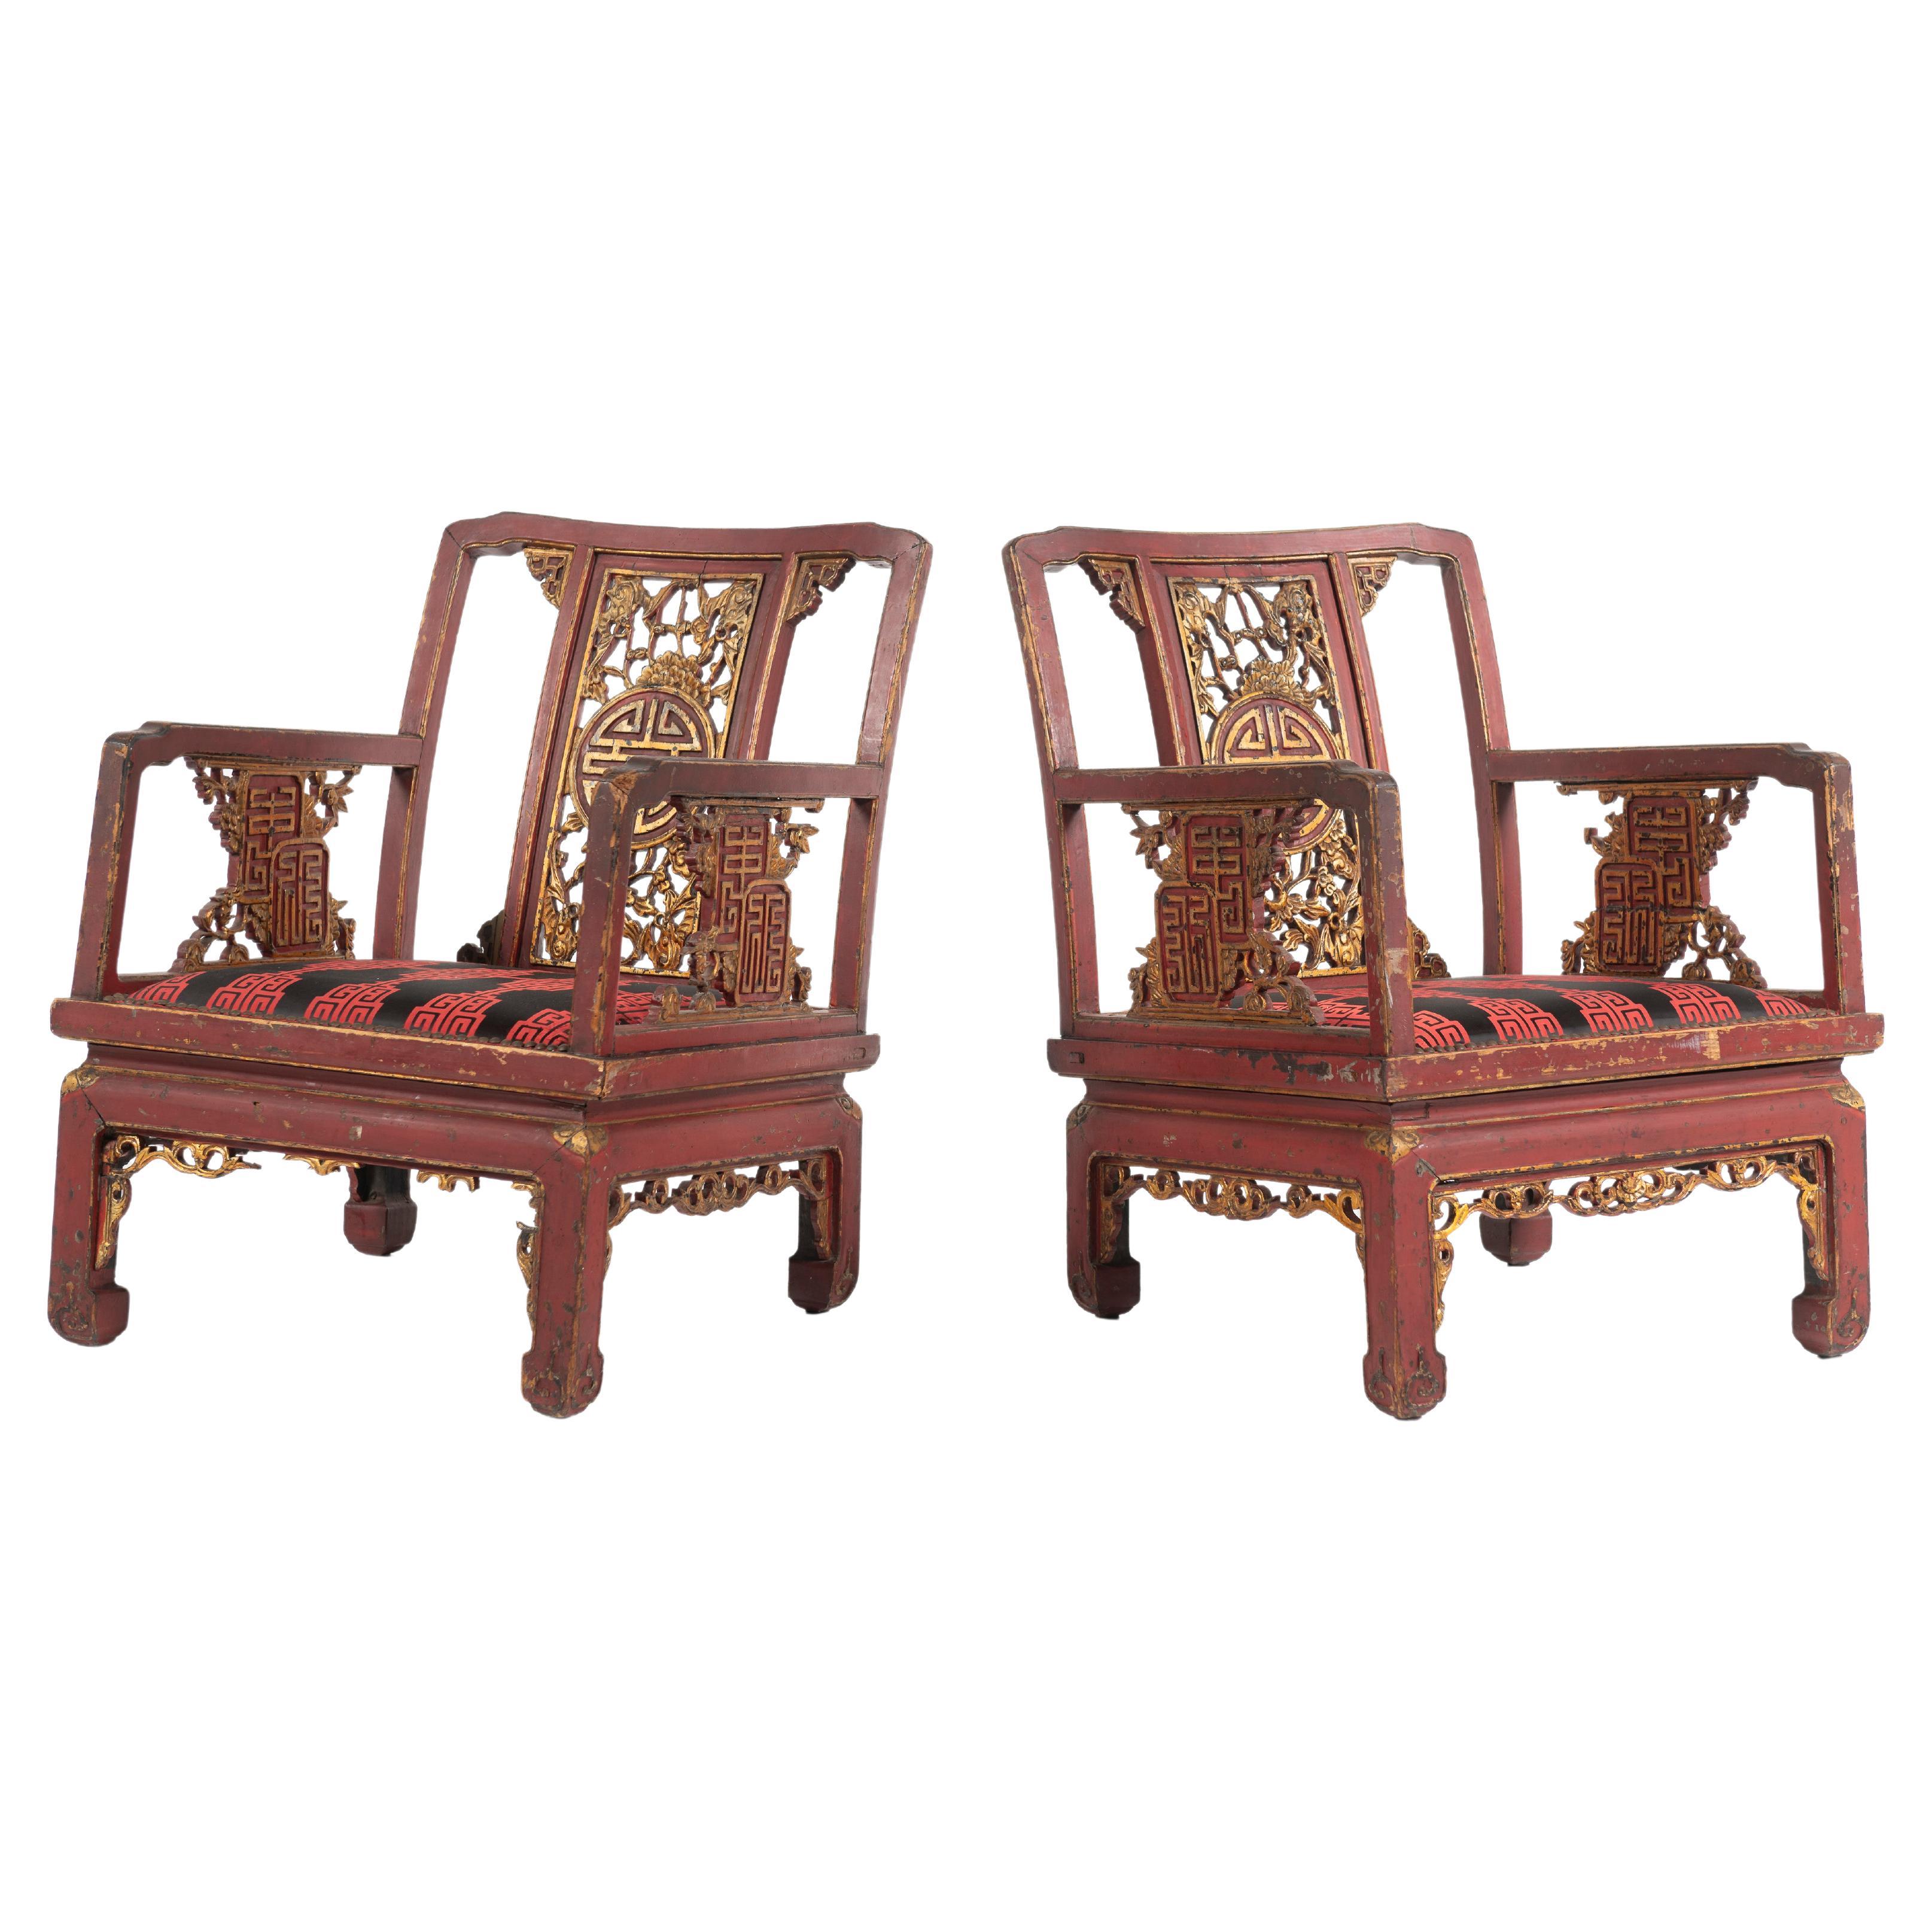 Pair of Antique French Chinoiserie Armchairs, Red and Gold Lacquer, 19th Century For Sale